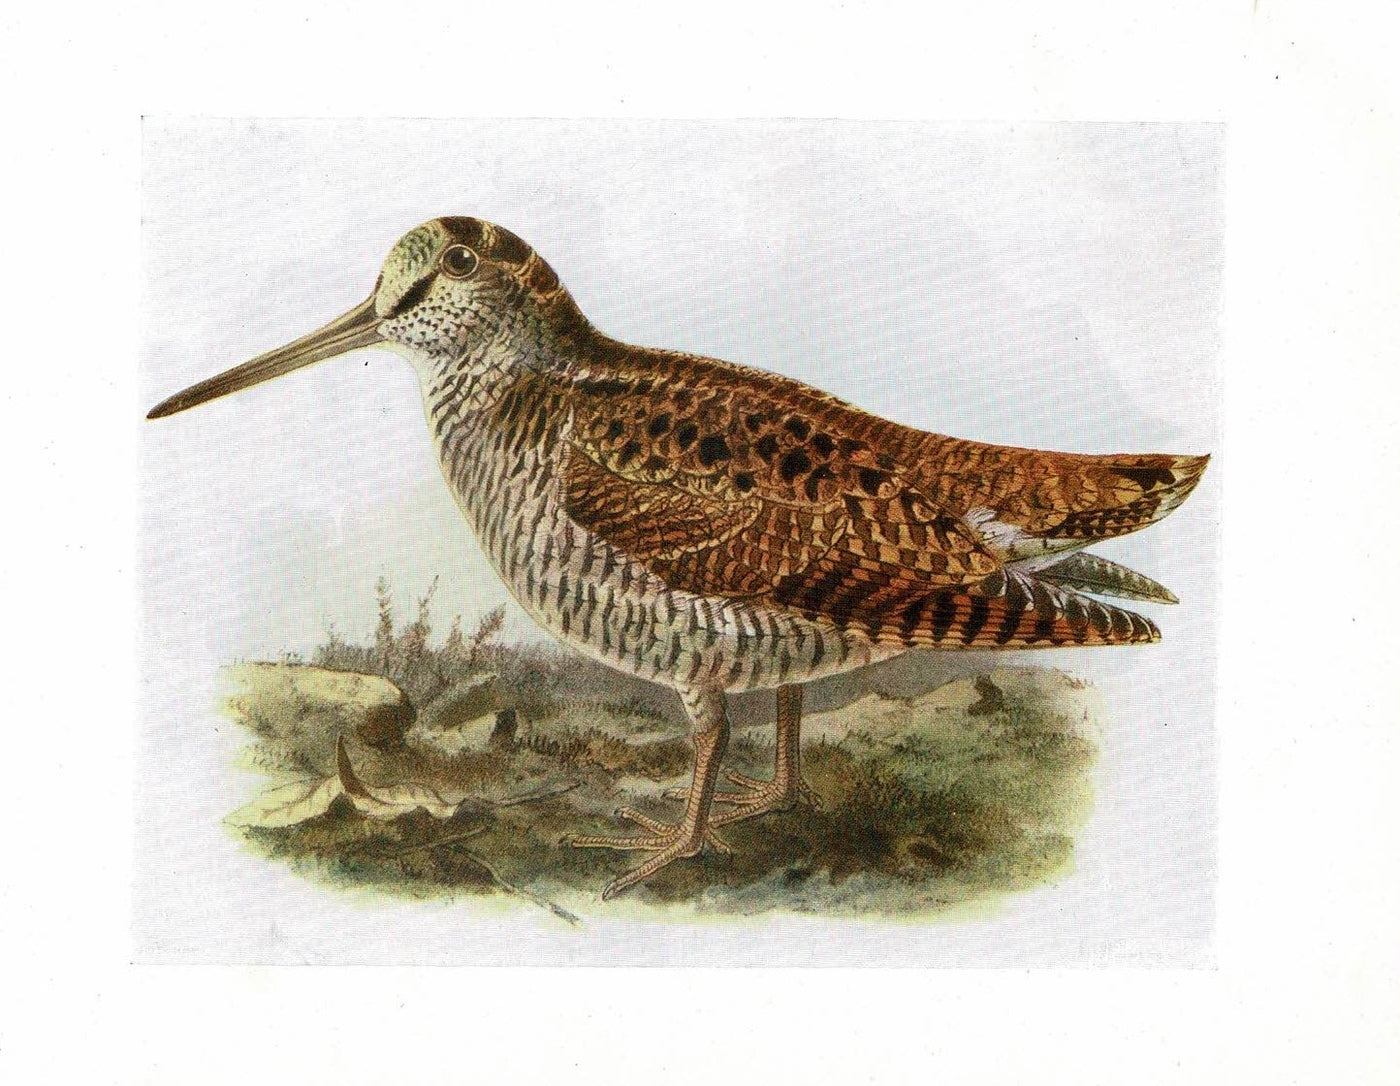 woodcock (Scolopax rusticula) antique print published in 1907